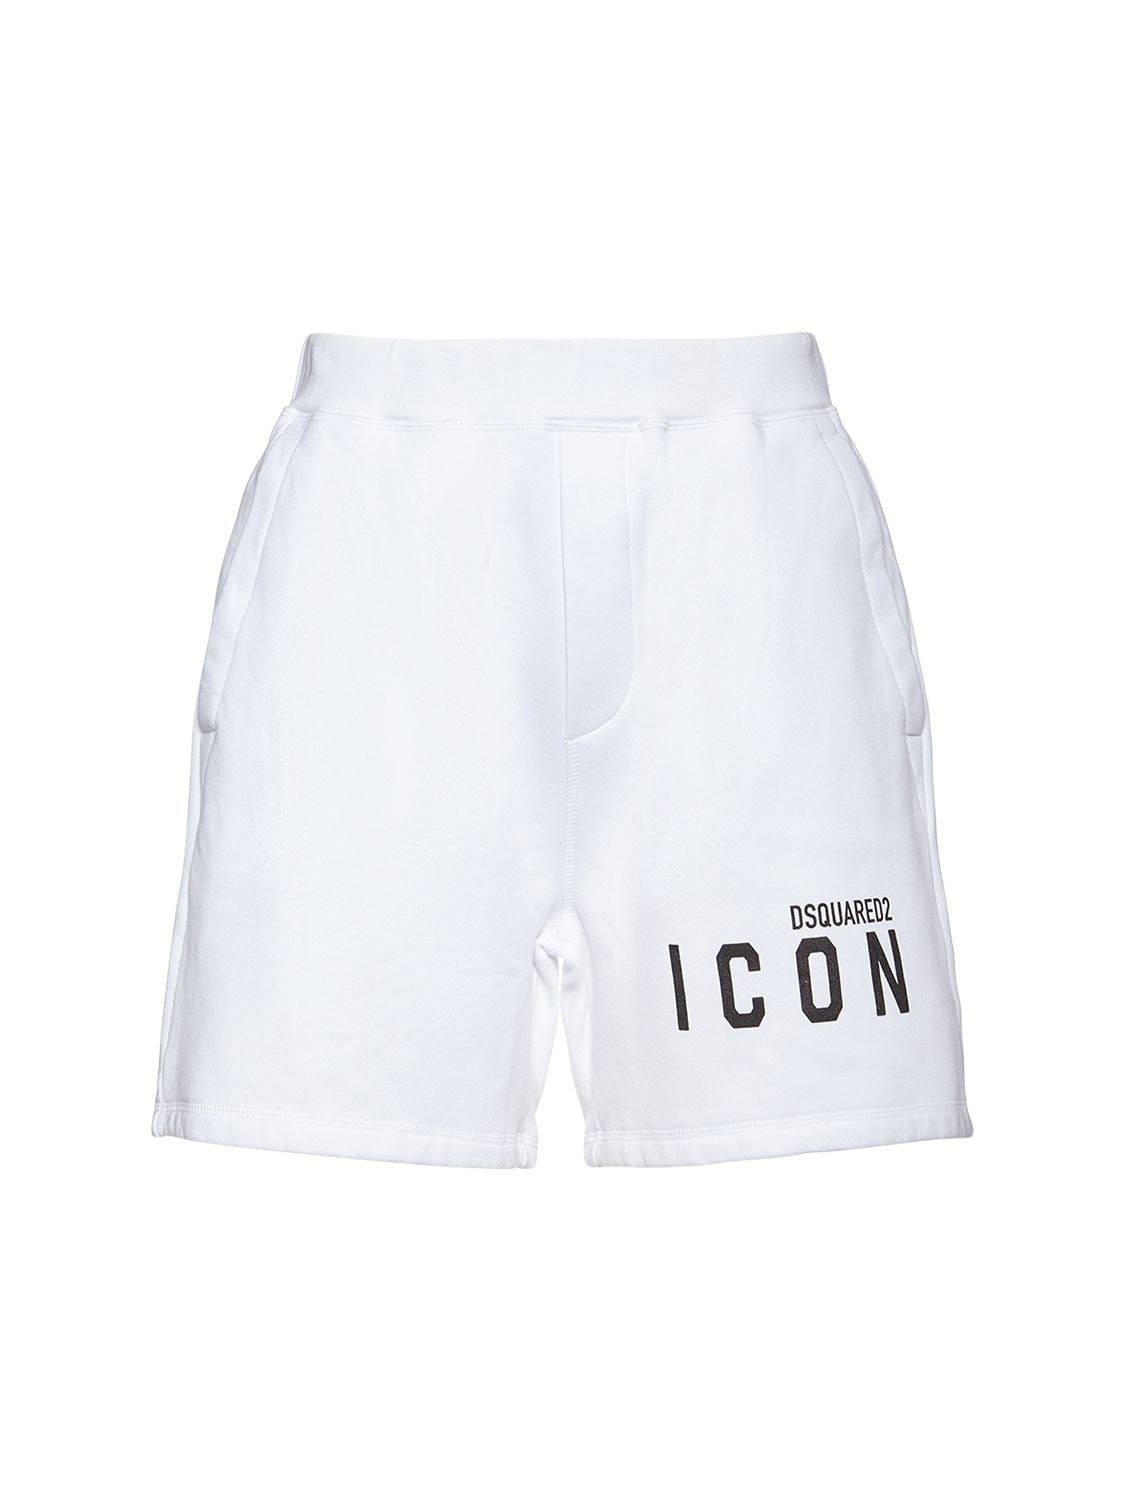 Homme Taille: S Miinto Homme Vêtements Pantalons & Jeans Pantalons courts Shorts Shorts sweatpants icon Blanc 